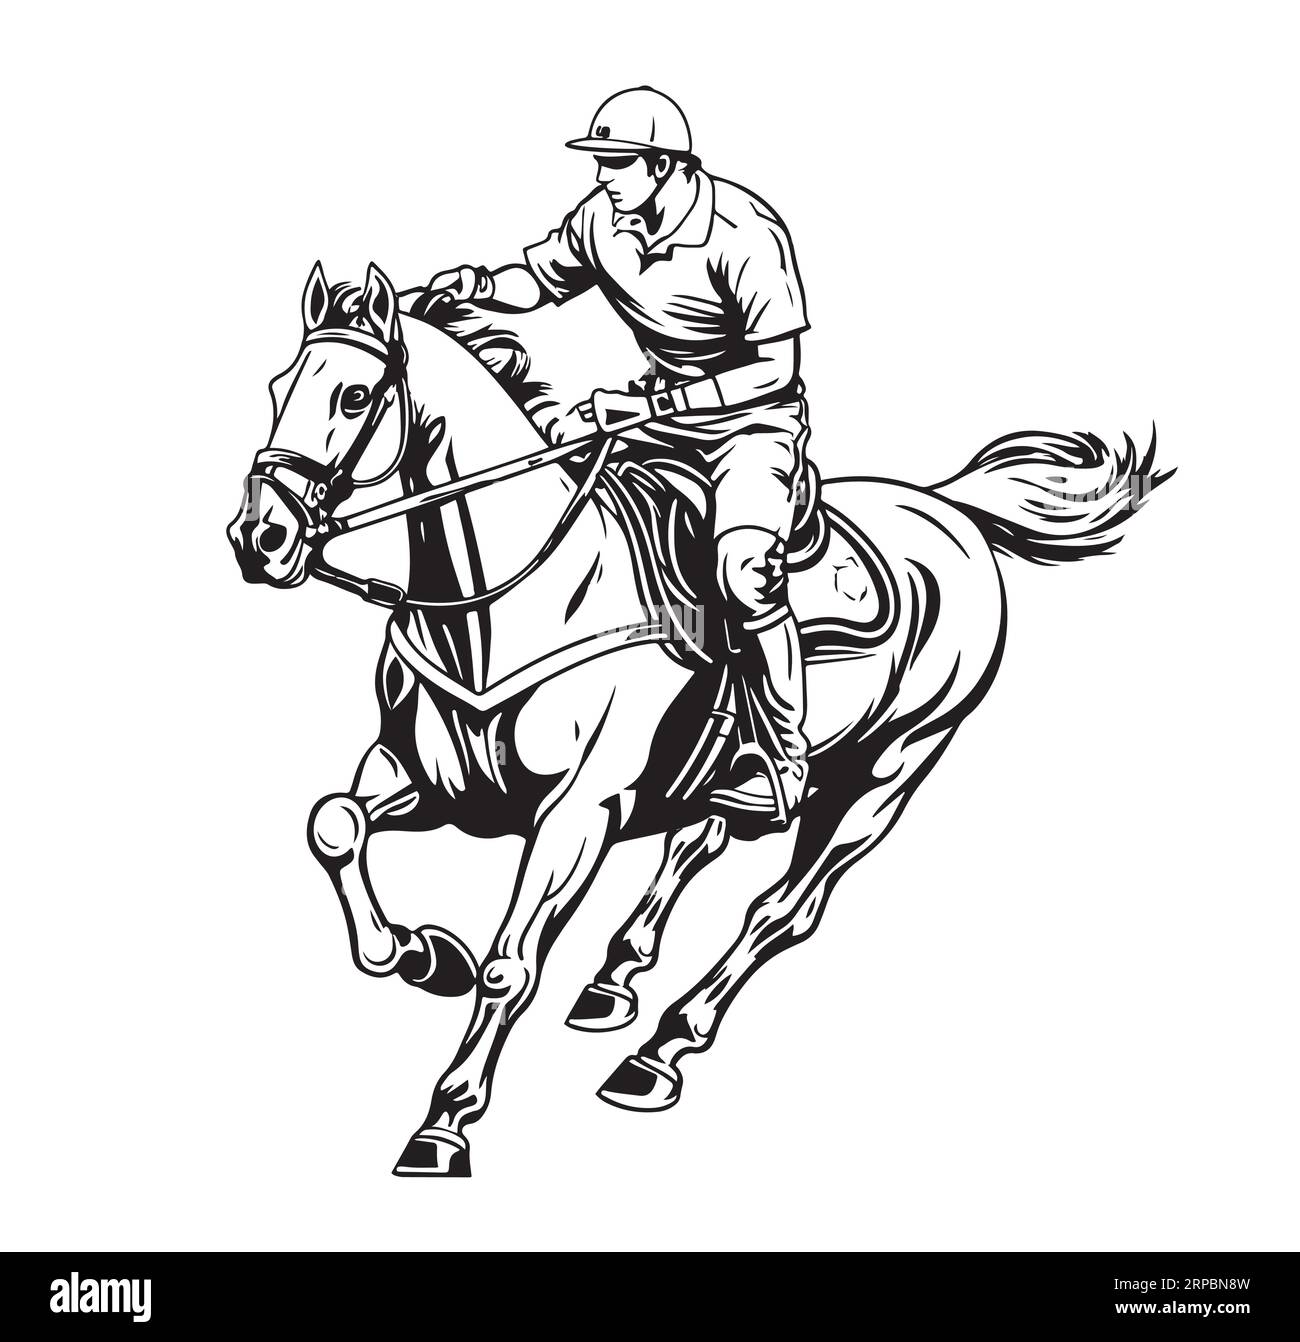 Polo gamer riding the horse hand drawn sketch illustration Stock Vector ...